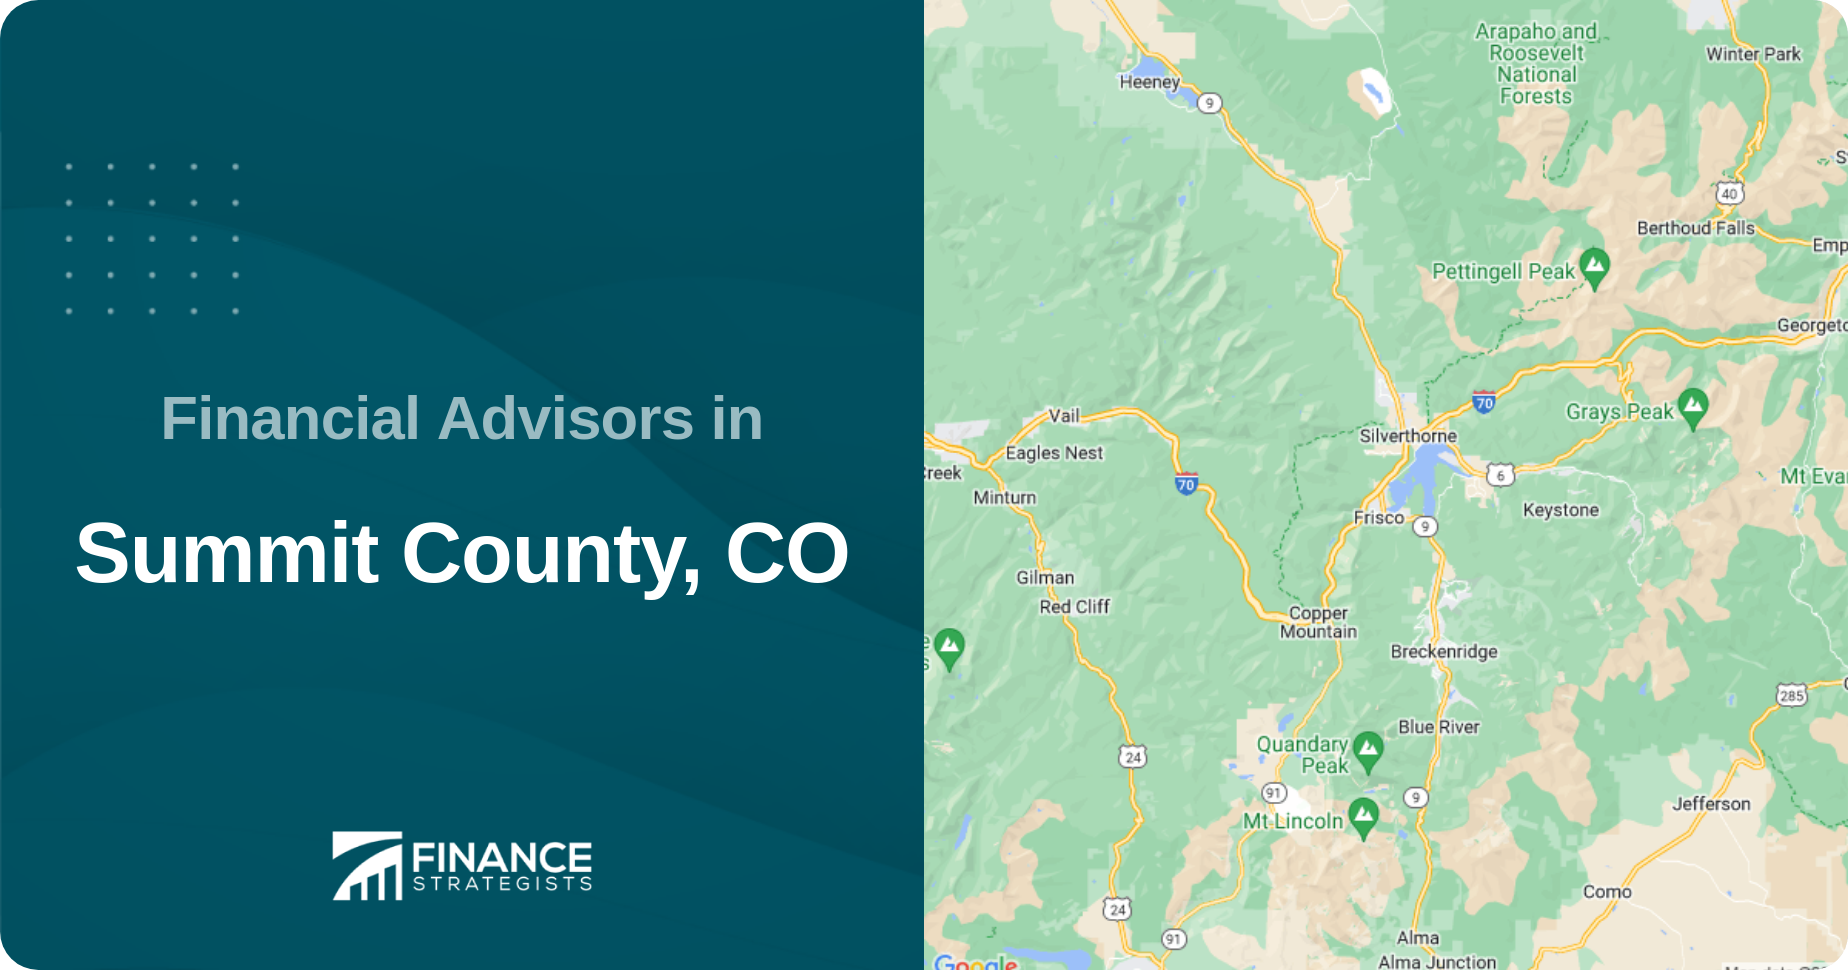 Financial Advisors in Summit County, CO